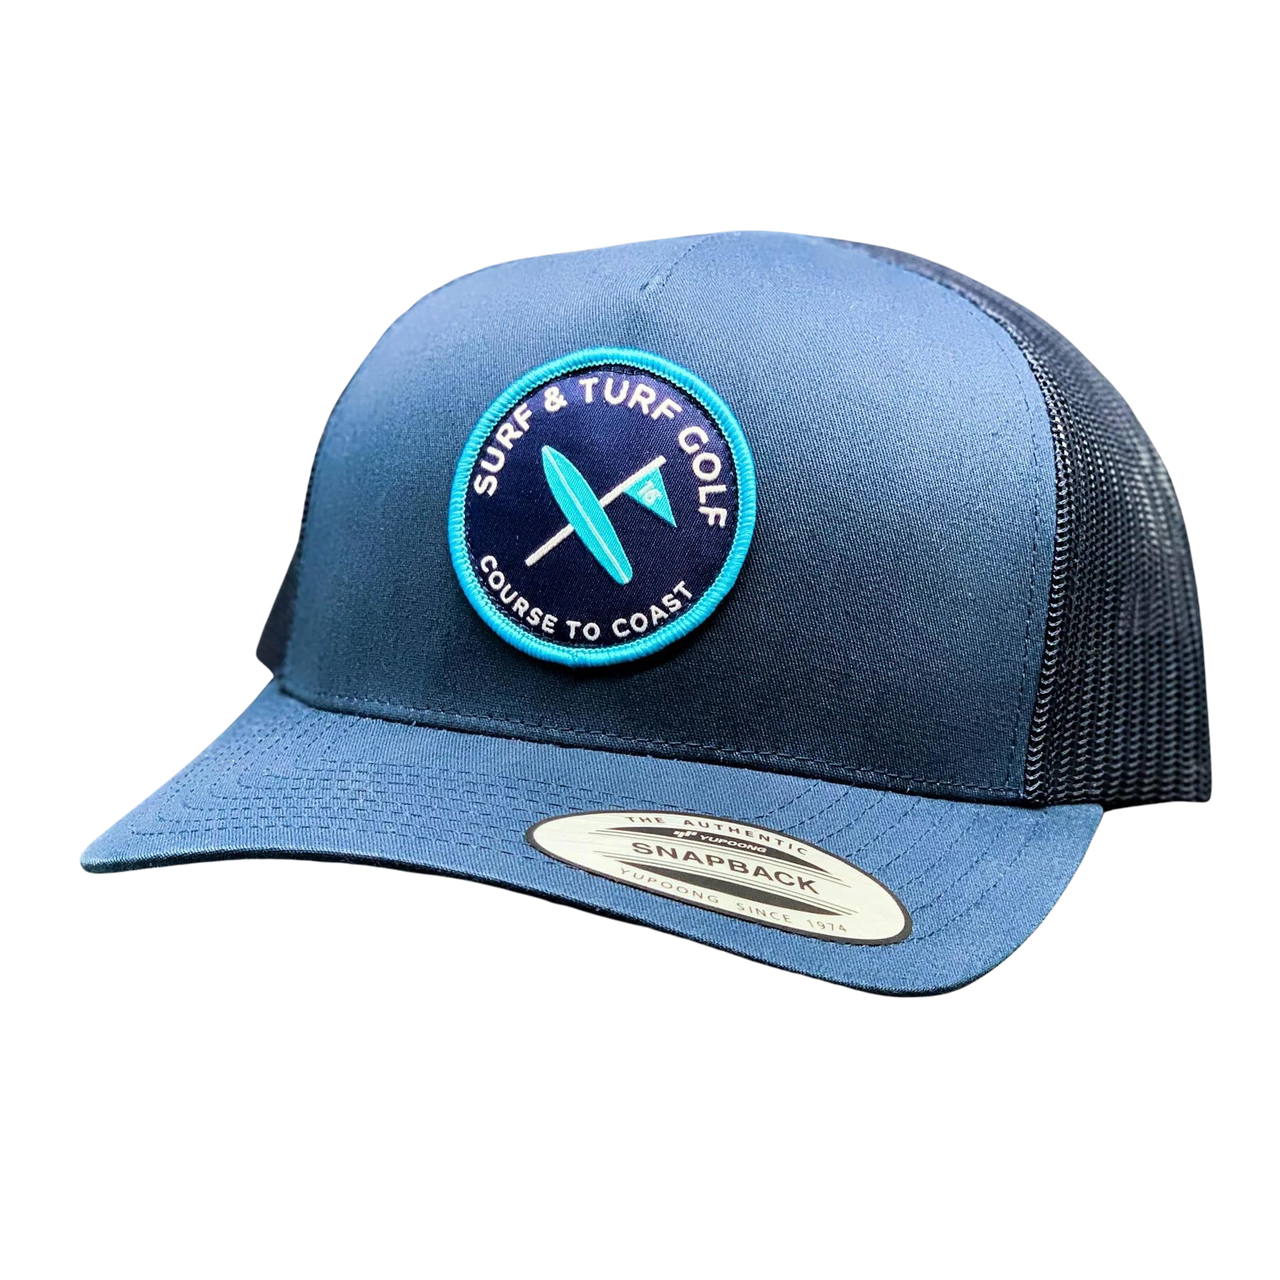 Surf & Turf Course to Coast 9 Hat